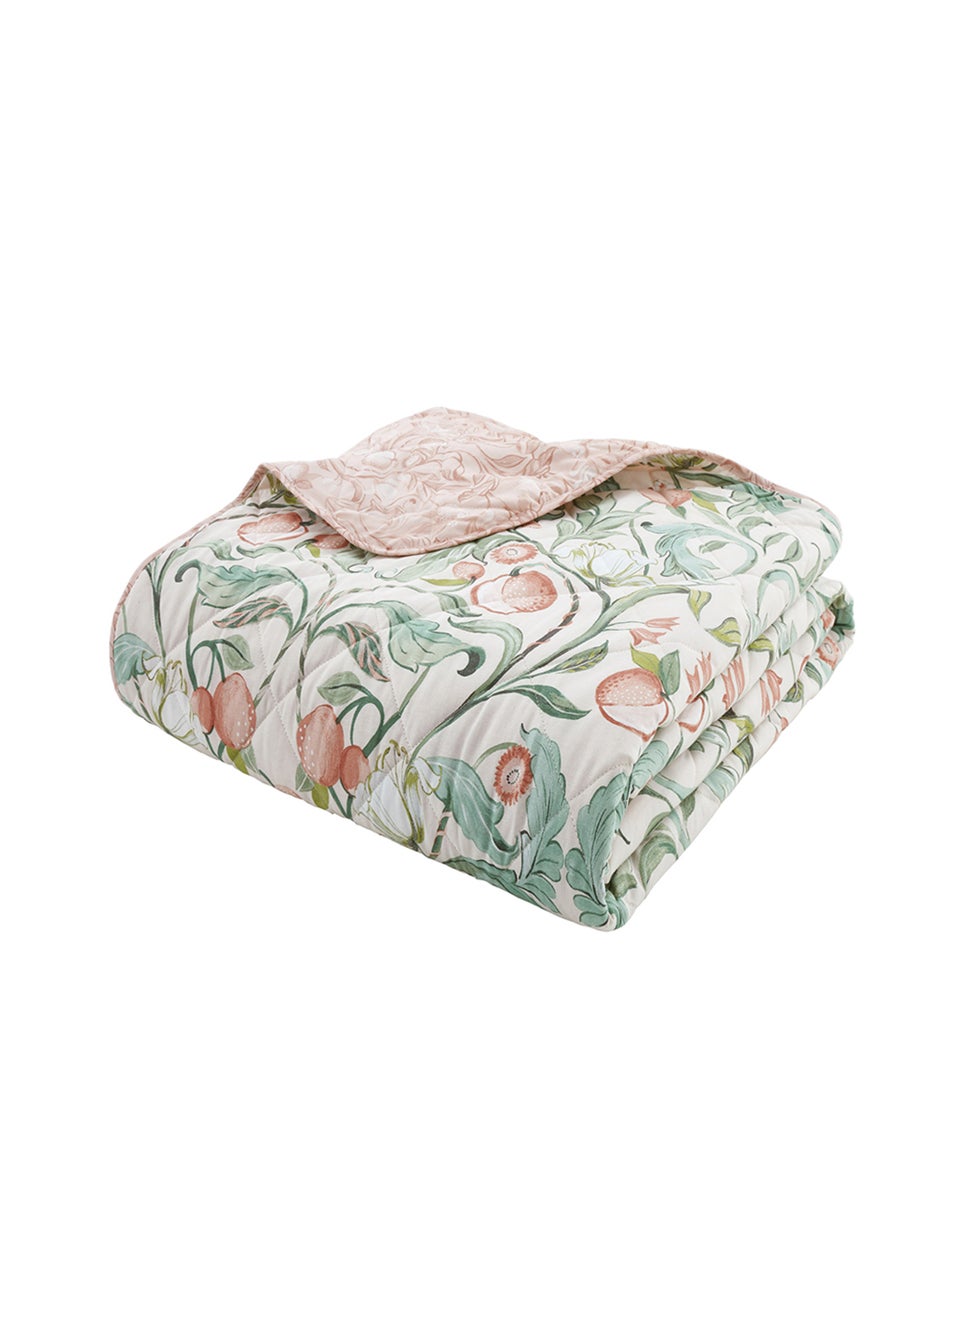 Catherine Lansfield Clarence Floral Quilted Bedspread